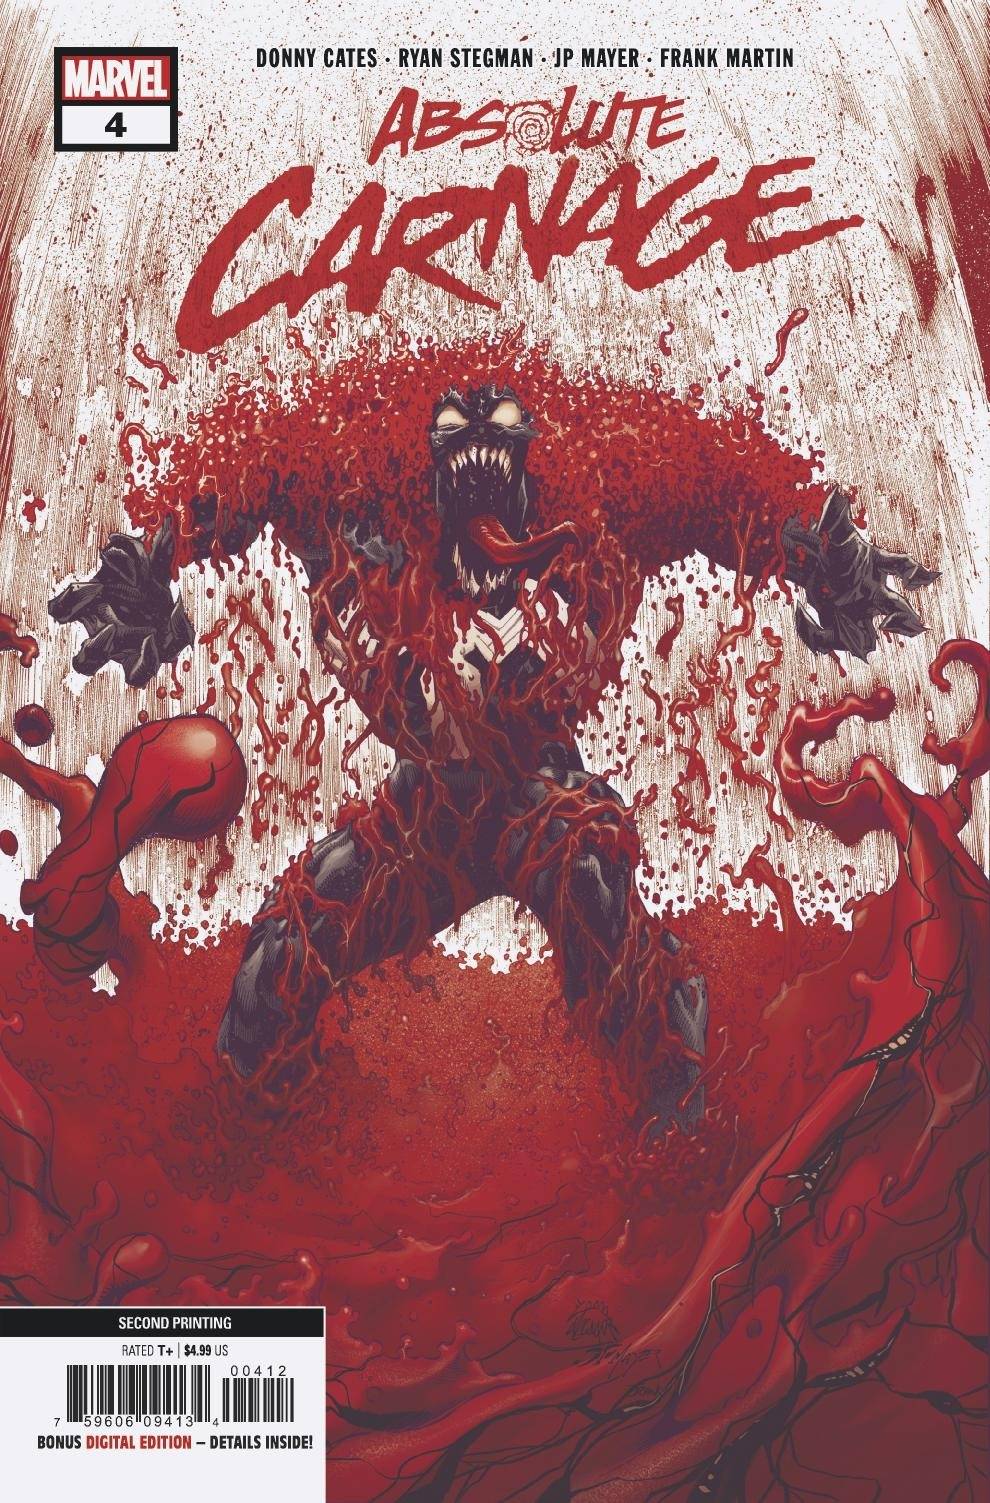 Absolute Carnage #4  MARVEL COMICS Stegman Cover A 1ST  PRINT  DONNY CATES 